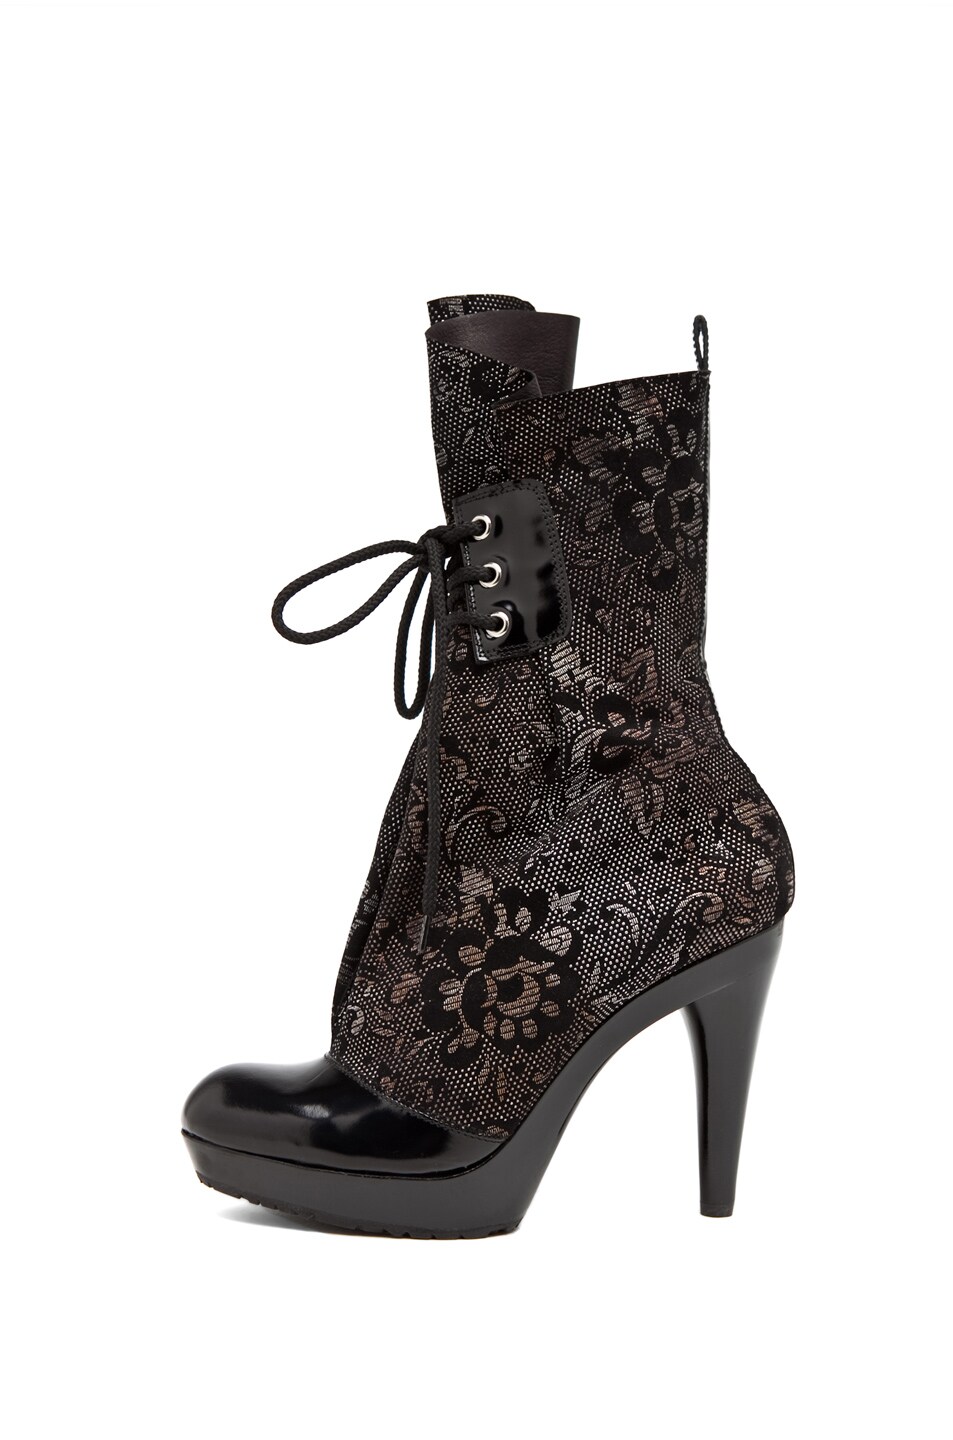 Image 1 of Vivienne Westwood Red Label Zoccolo Bag Boot in Romantico Black